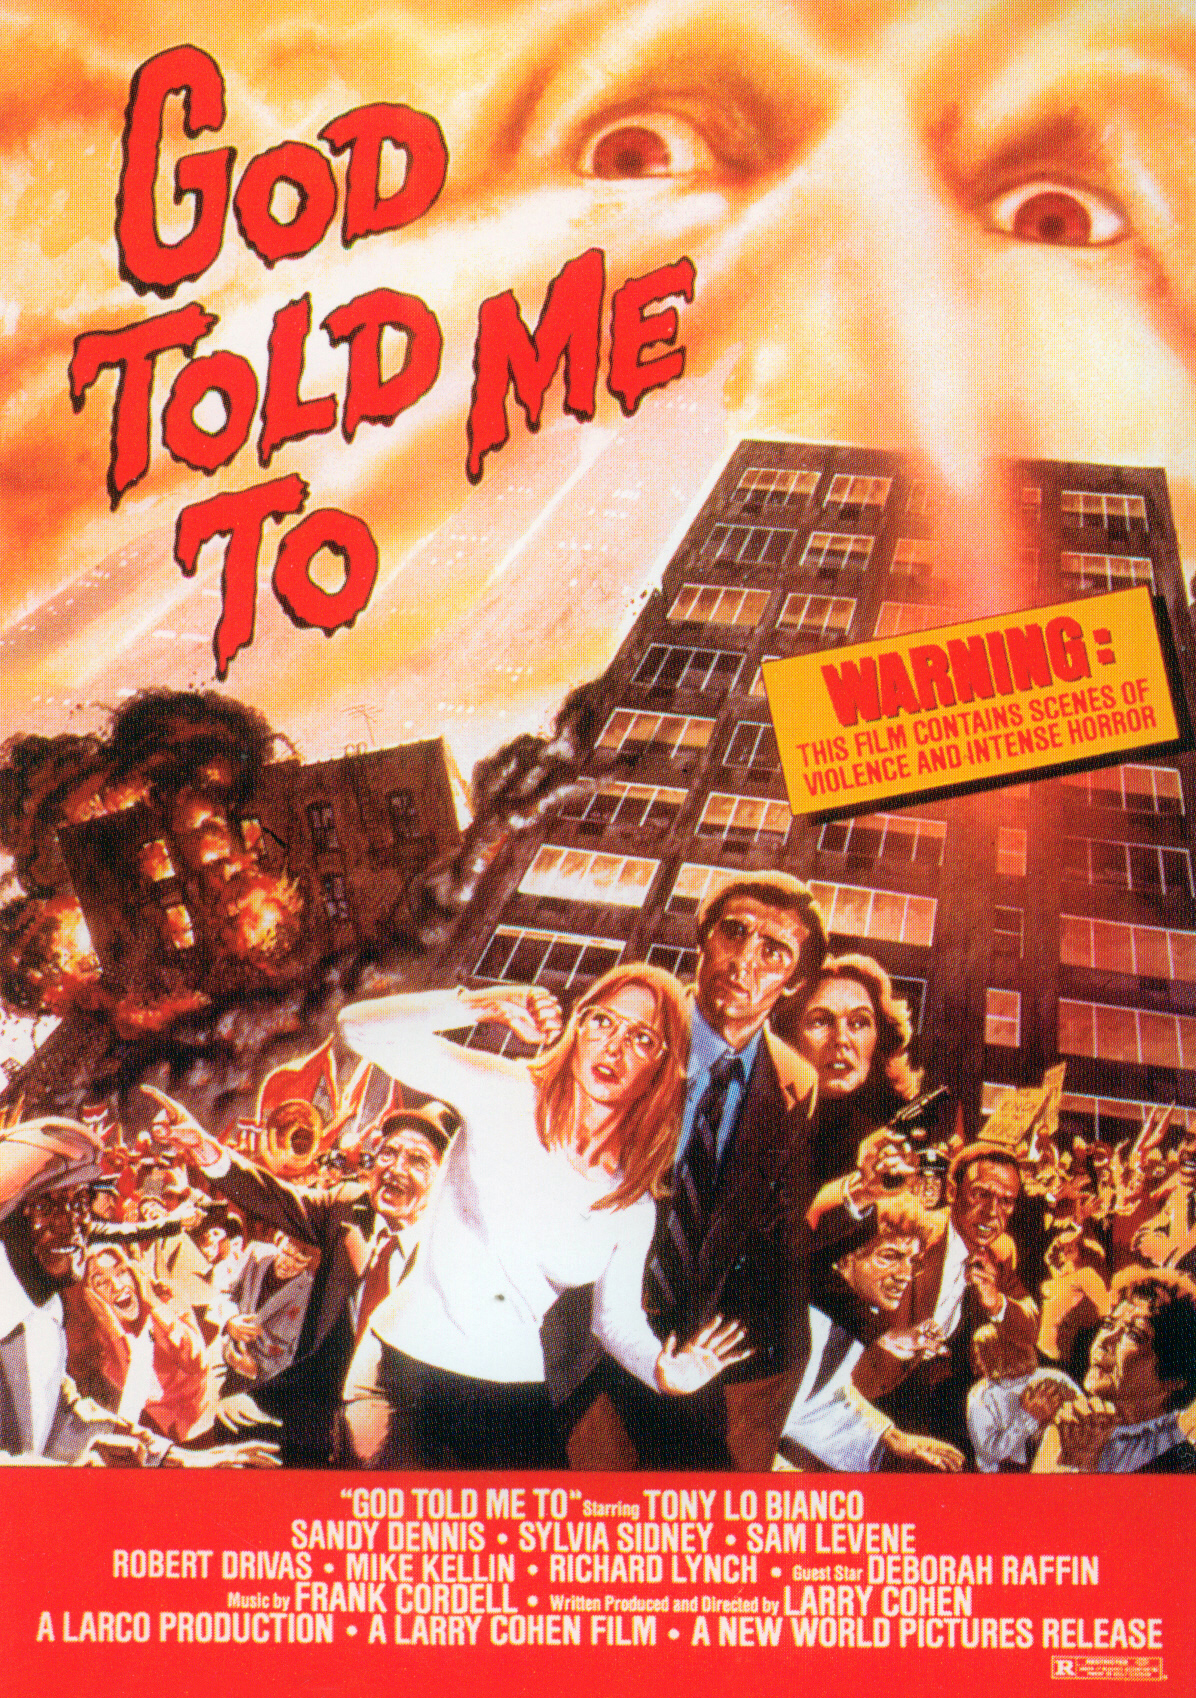 God Told Me To (1976) aka Demon

Directed by Larry Cohen

Shown: Poster Art